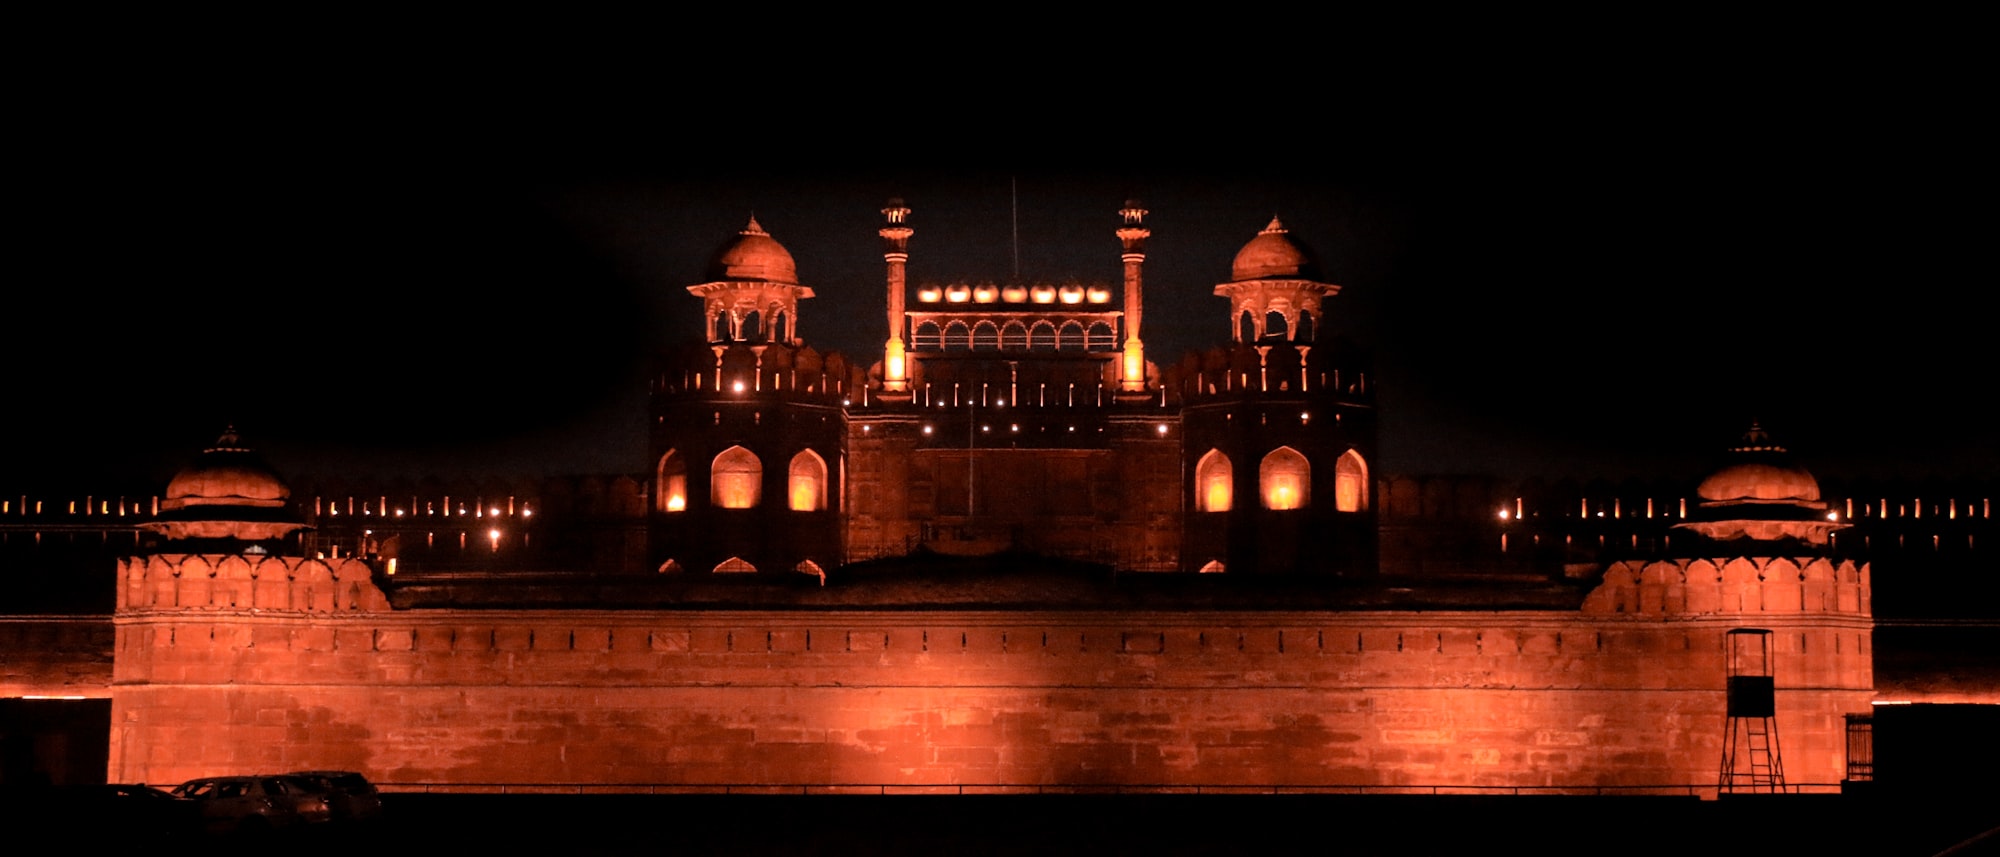 10-day Red fort festival to commence from March 25